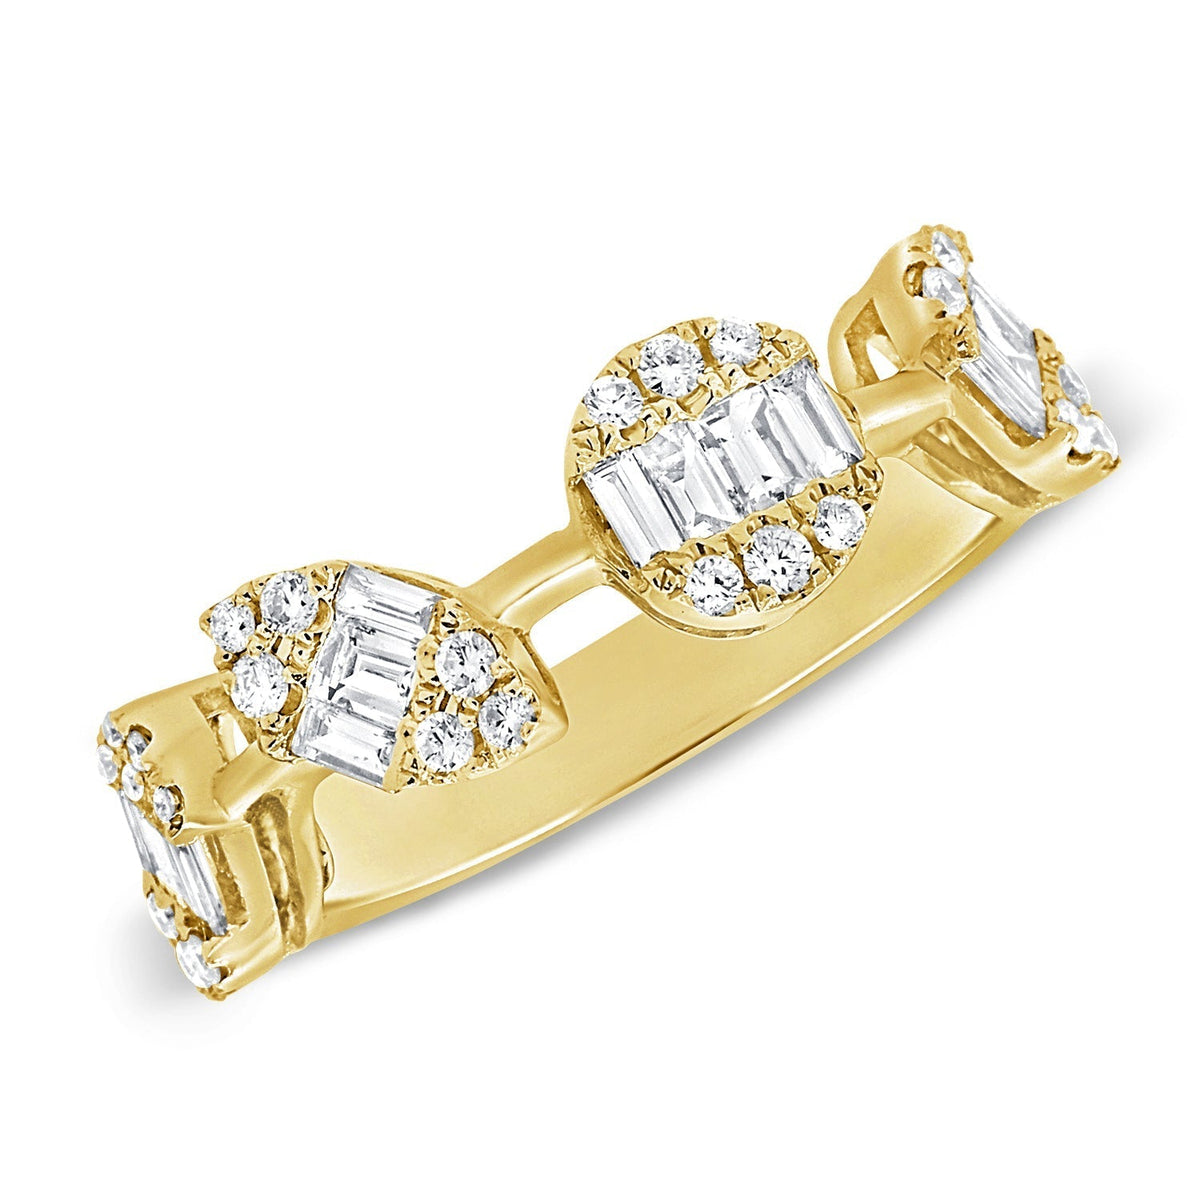 14K Yellow Gold Ring with Diamond Baguettes Elegant and Modern for speacial days.  14K Yellow Gold total weight: 3.80 grams 27 Diamonds: 0.28 ct 13 Baguettes: 0.46 ct